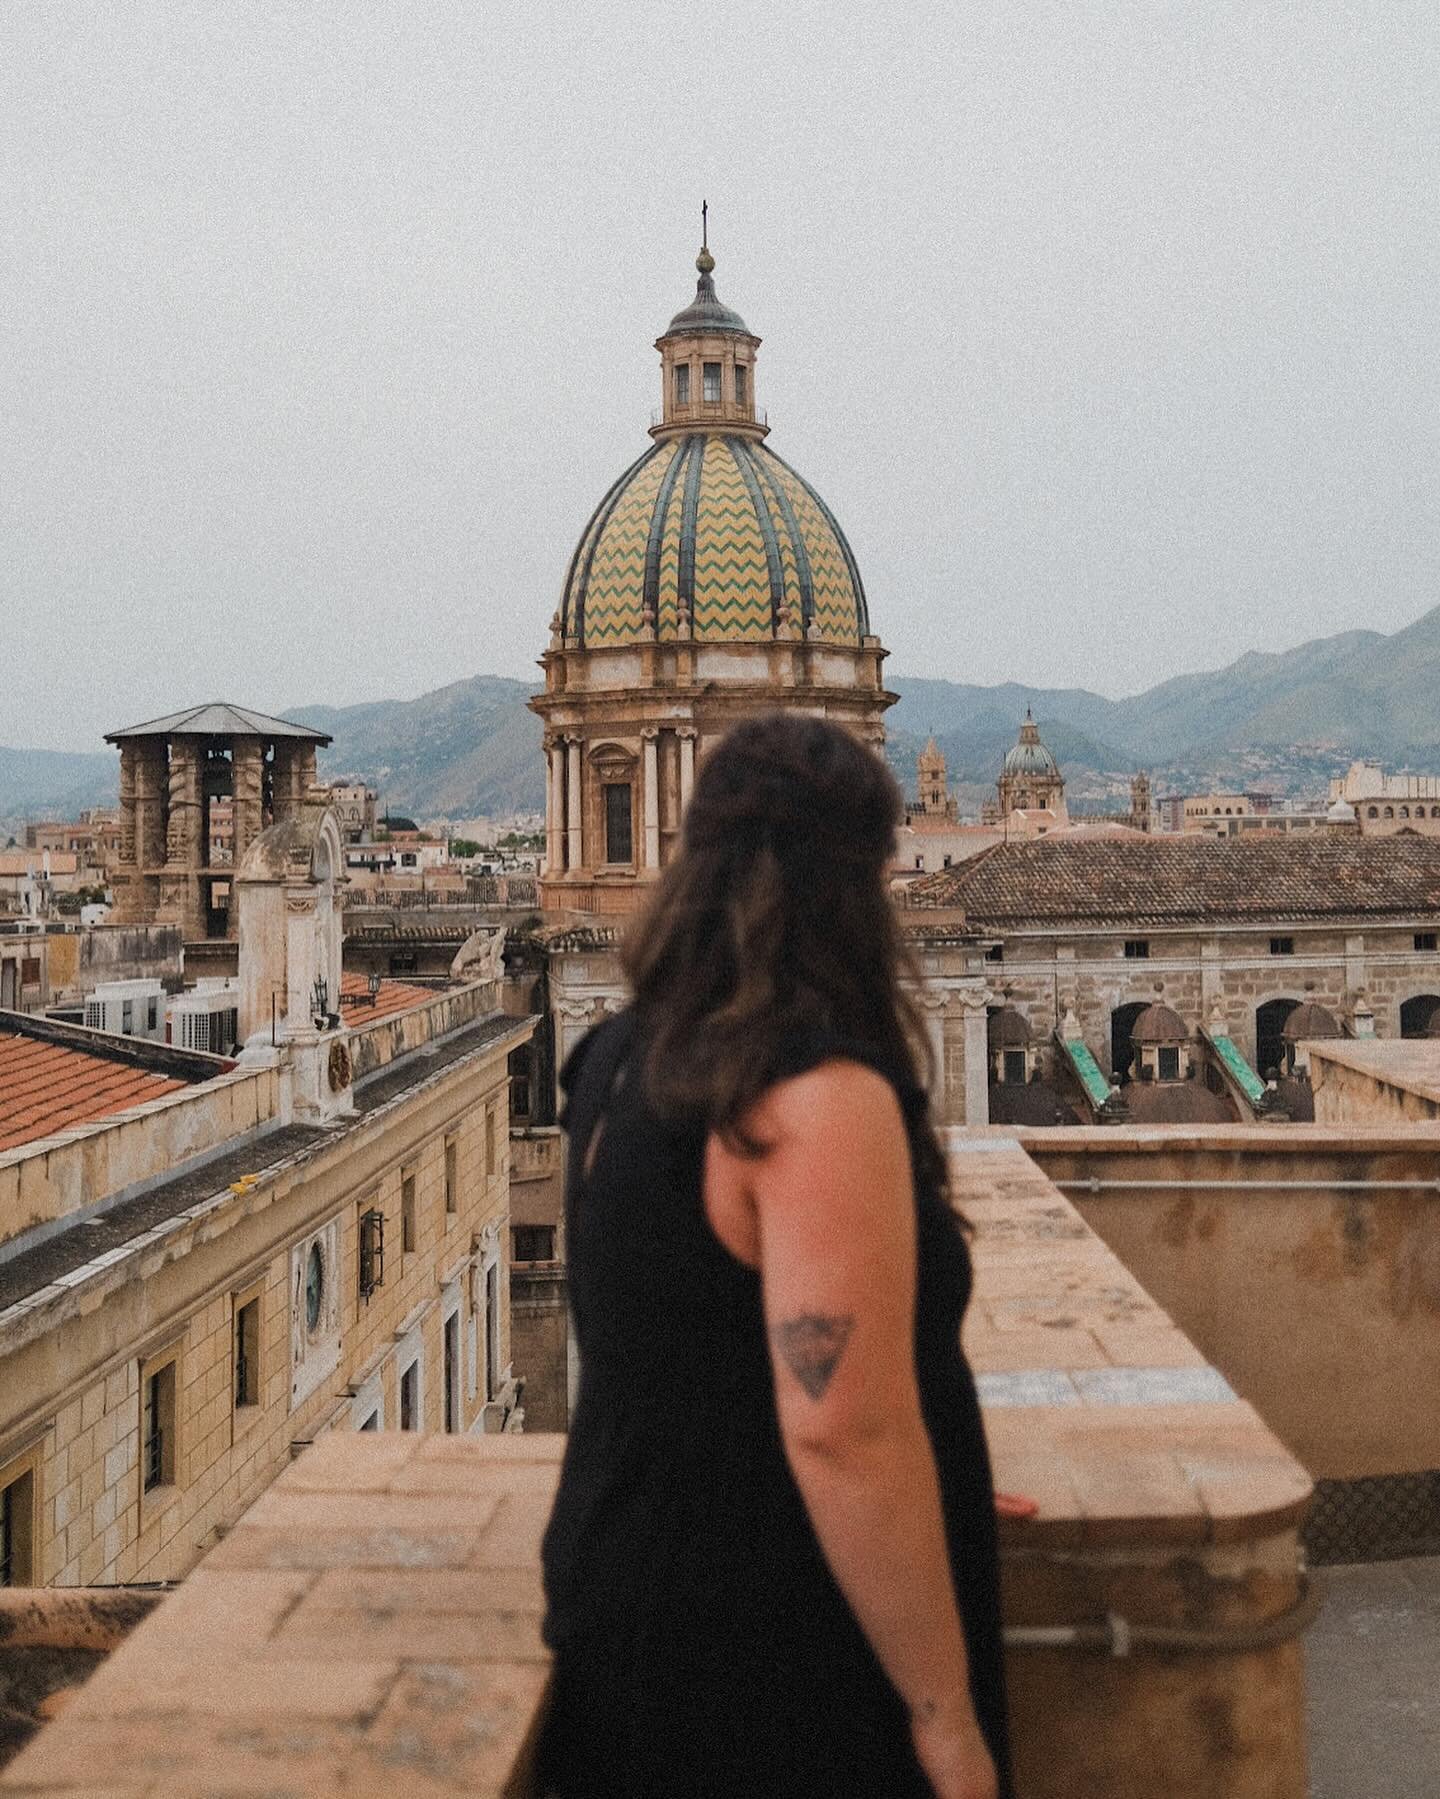 Palermo, Sicily 🇮🇹 
Despite feeling a bit under the weather, our one day in this capital city was very full and very fun. It&rsquo;s such a historic, bustling destination full of wonderful people and delicious food&hellip; plus it&rsquo;s a gateway